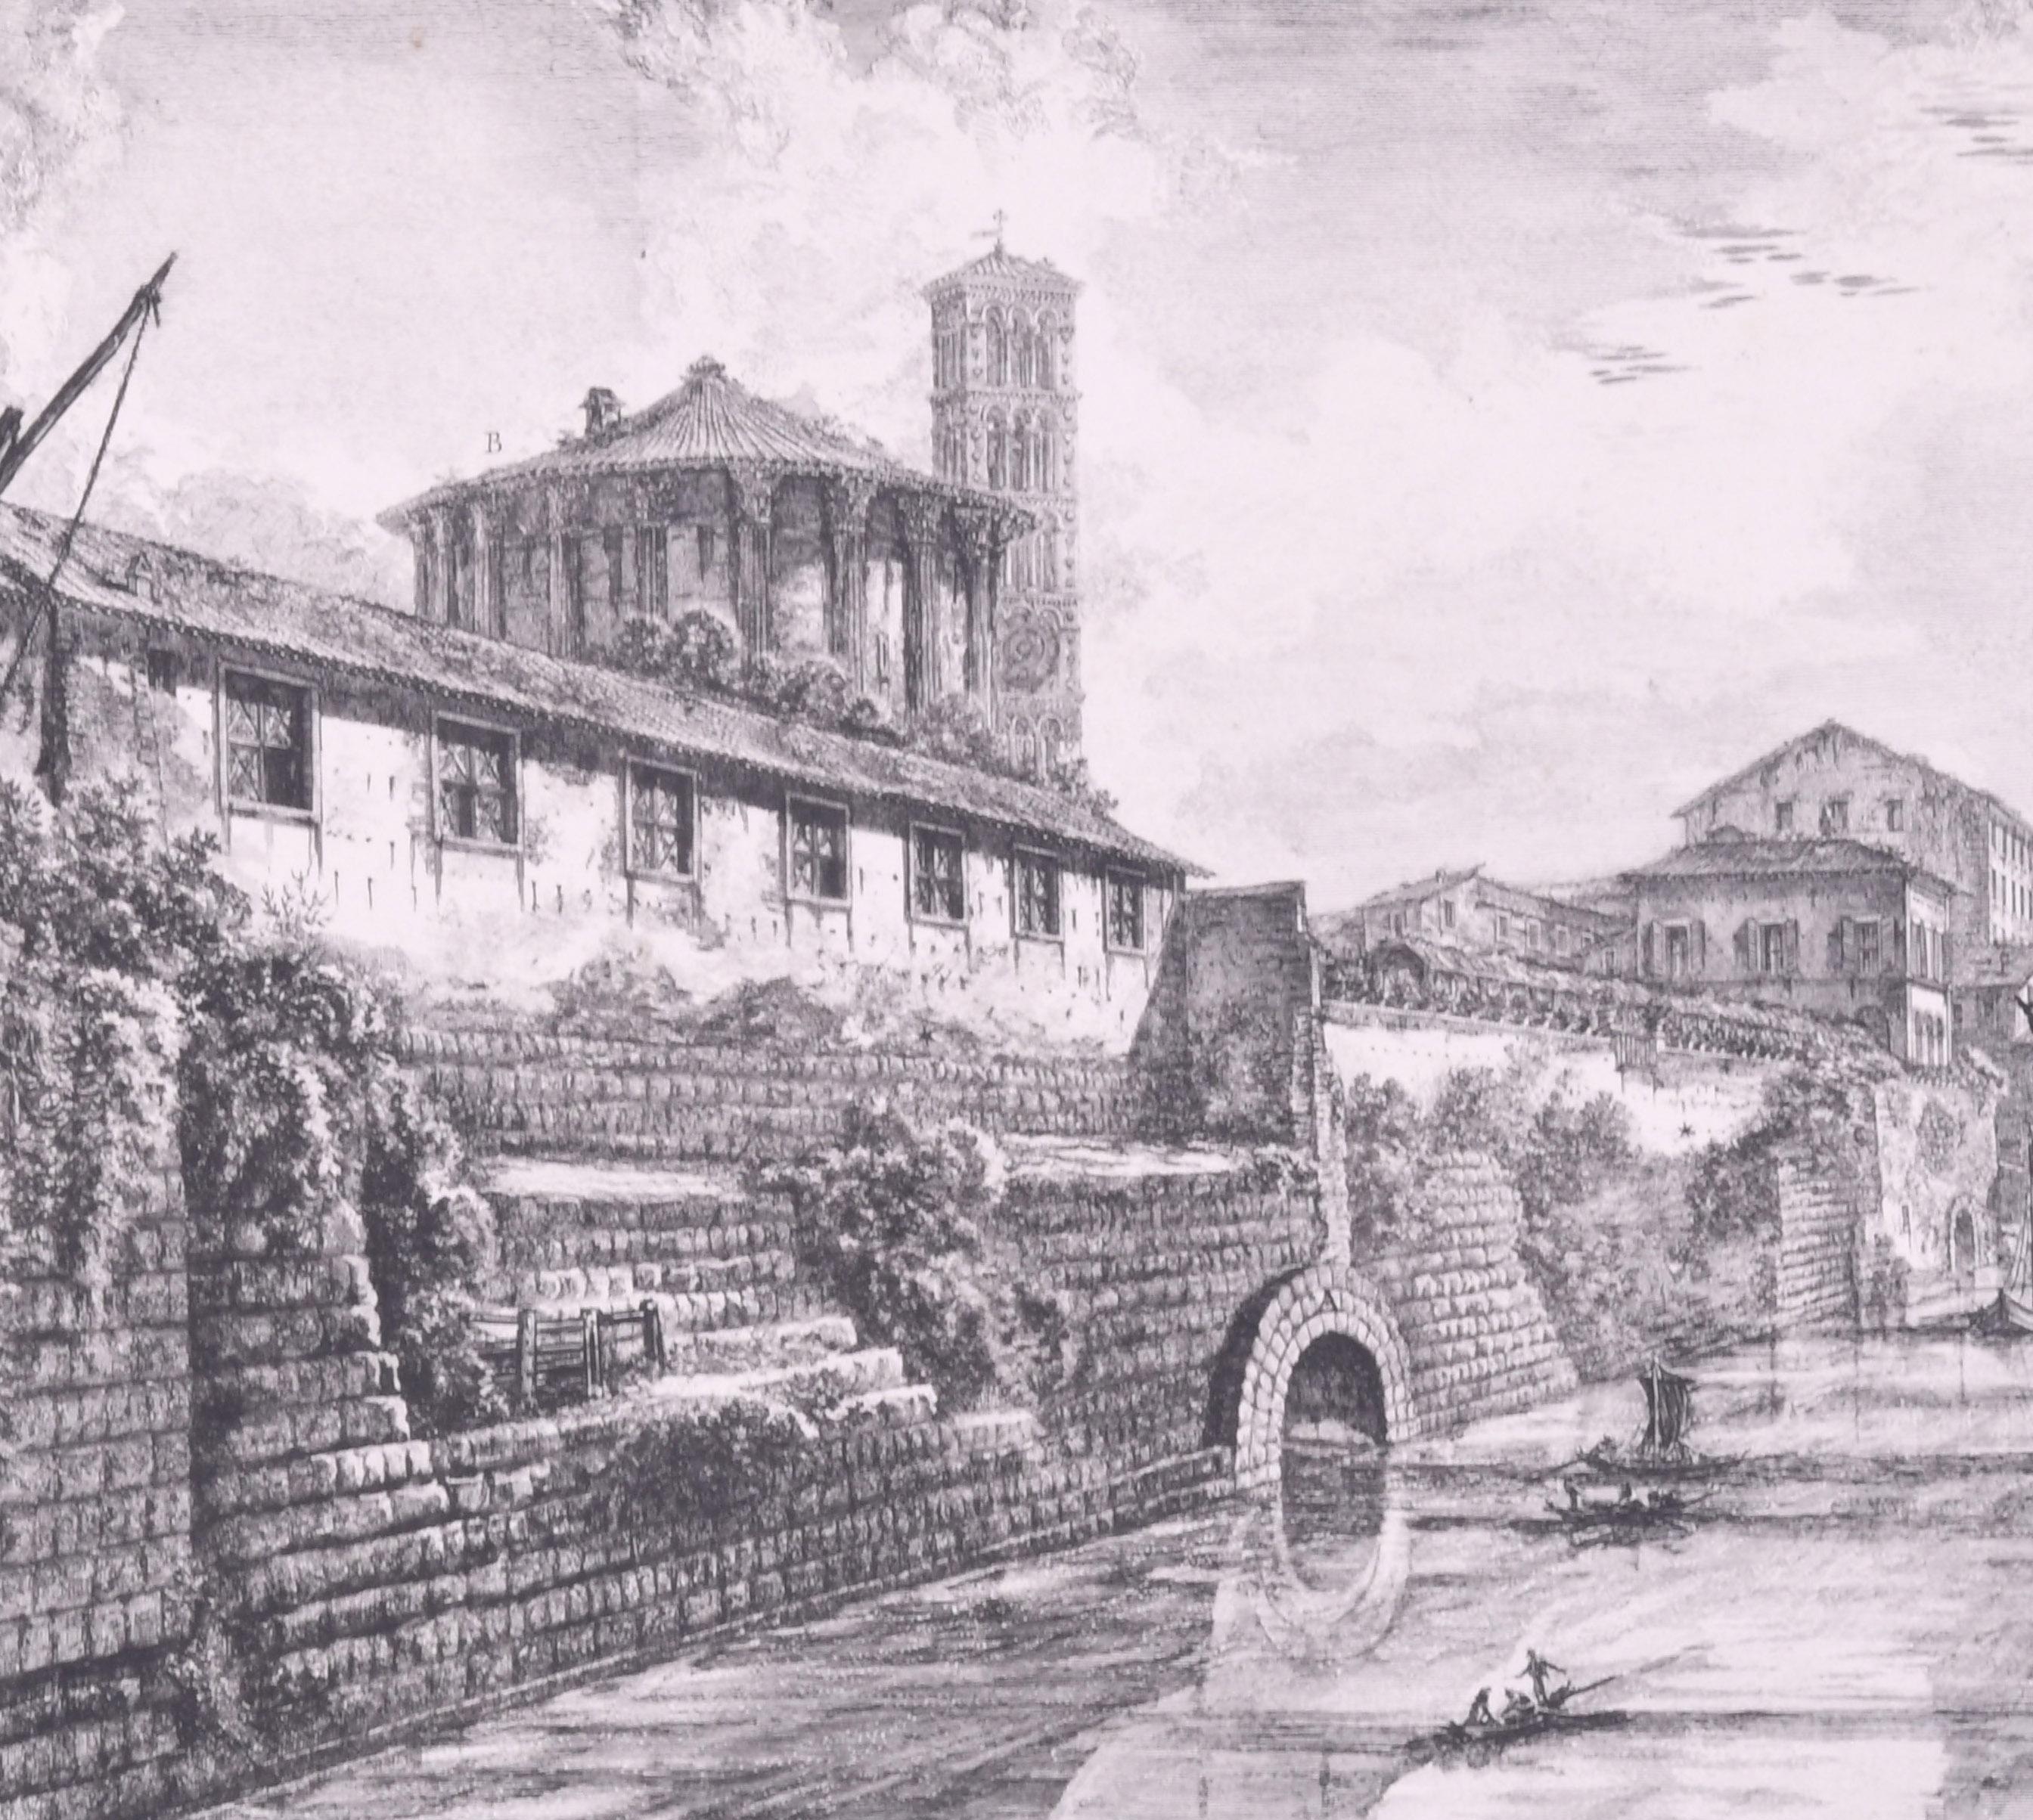 View of the Ancient Structure built by Tarquinius Superbus called the Bel Lido - Old Masters Print by Giovanni Battista Piranesi